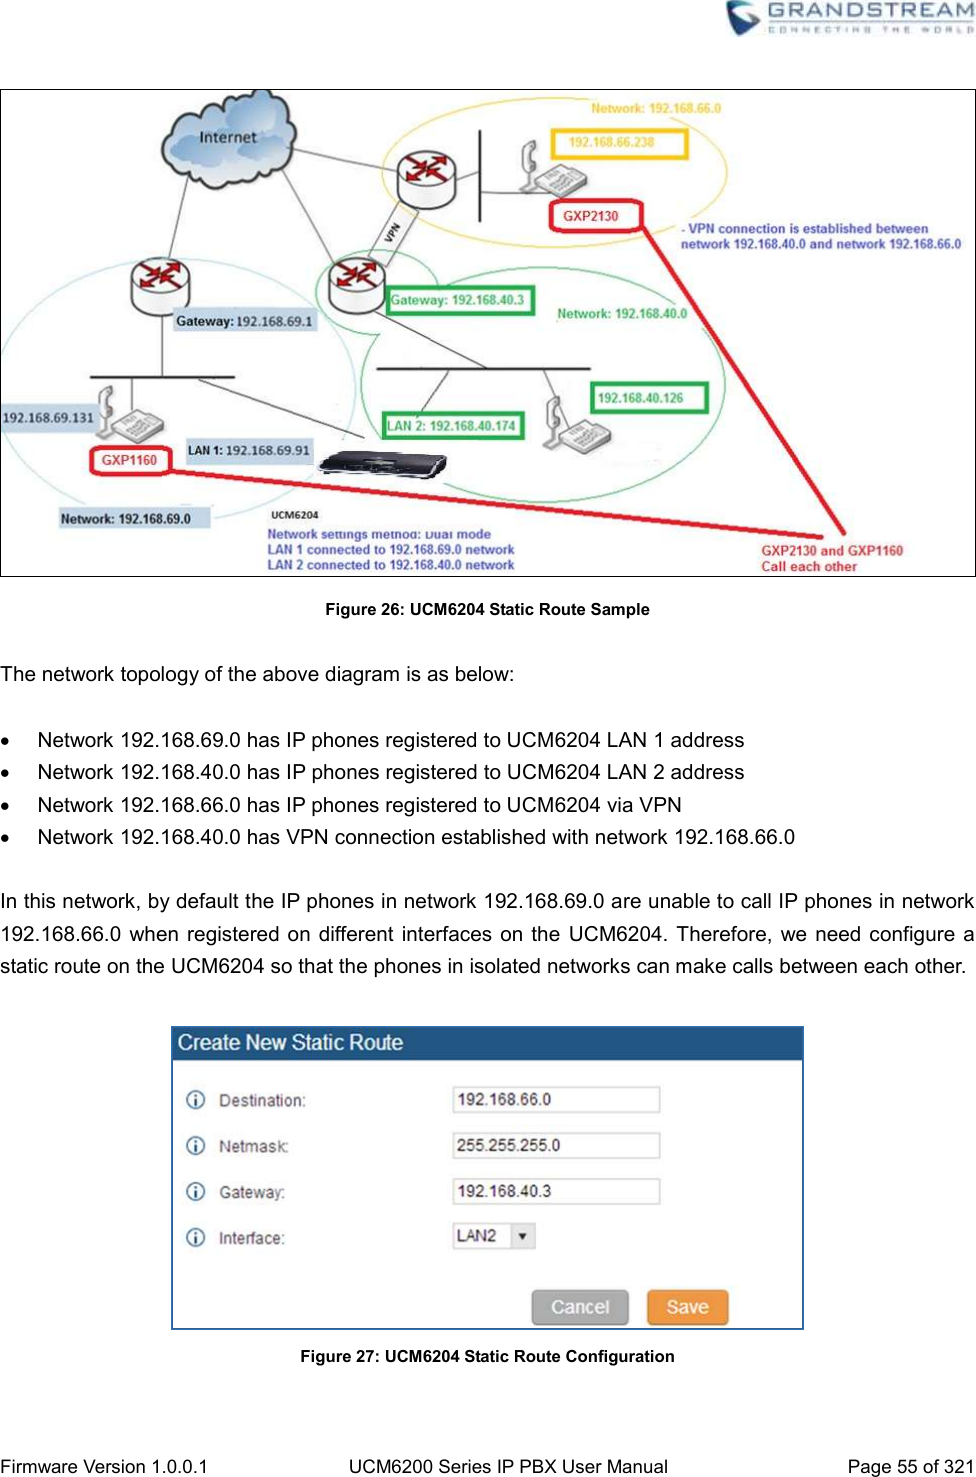  Firmware Version 1.0.0.1 UCM6200 Series IP PBX User Manual Page 55 of 321     Figure 26: UCM6204 Static Route Sample  The network topology of the above diagram is as below:    Network 192.168.69.0 has IP phones registered to UCM6204 LAN 1 address   Network 192.168.40.0 has IP phones registered to UCM6204 LAN 2 address   Network 192.168.66.0 has IP phones registered to UCM6204 via VPN   Network 192.168.40.0 has VPN connection established with network 192.168.66.0  In this network, by default the IP phones in network 192.168.69.0 are unable to call IP phones in network 192.168.66.0  when registered on  different interfaces on the  UCM6204.  Therefore,  we need configure a static route on the UCM6204 so that the phones in isolated networks can make calls between each other.   Figure 27: UCM6204 Static Route Configuration  